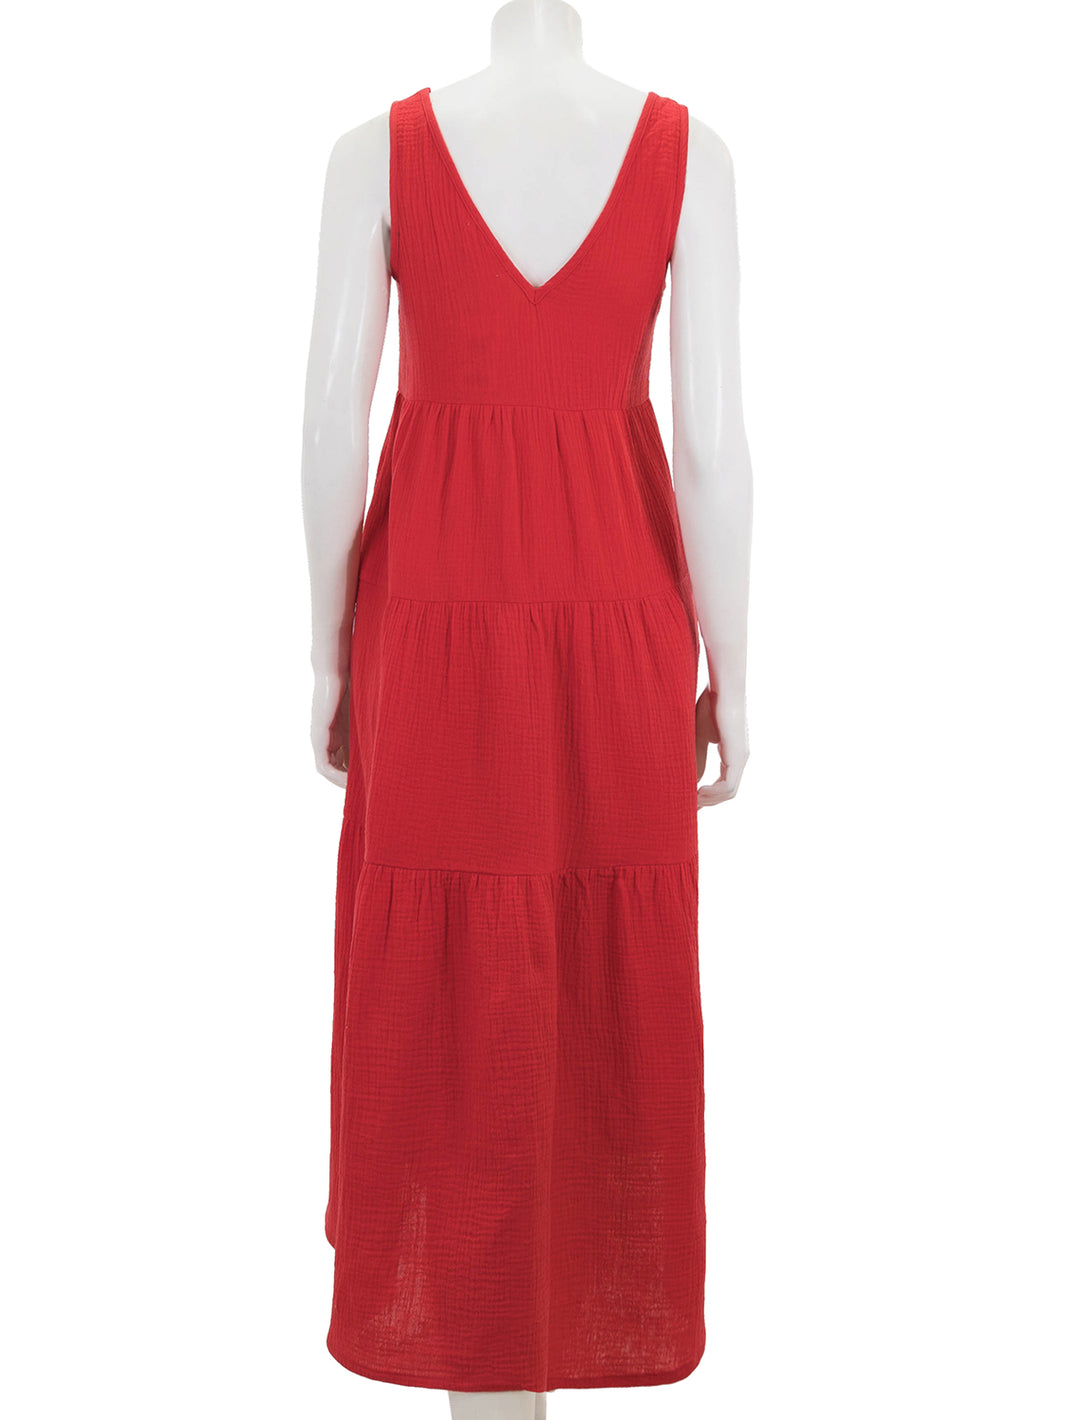 Back view of Marine Layer's corinne maxi dress in red.